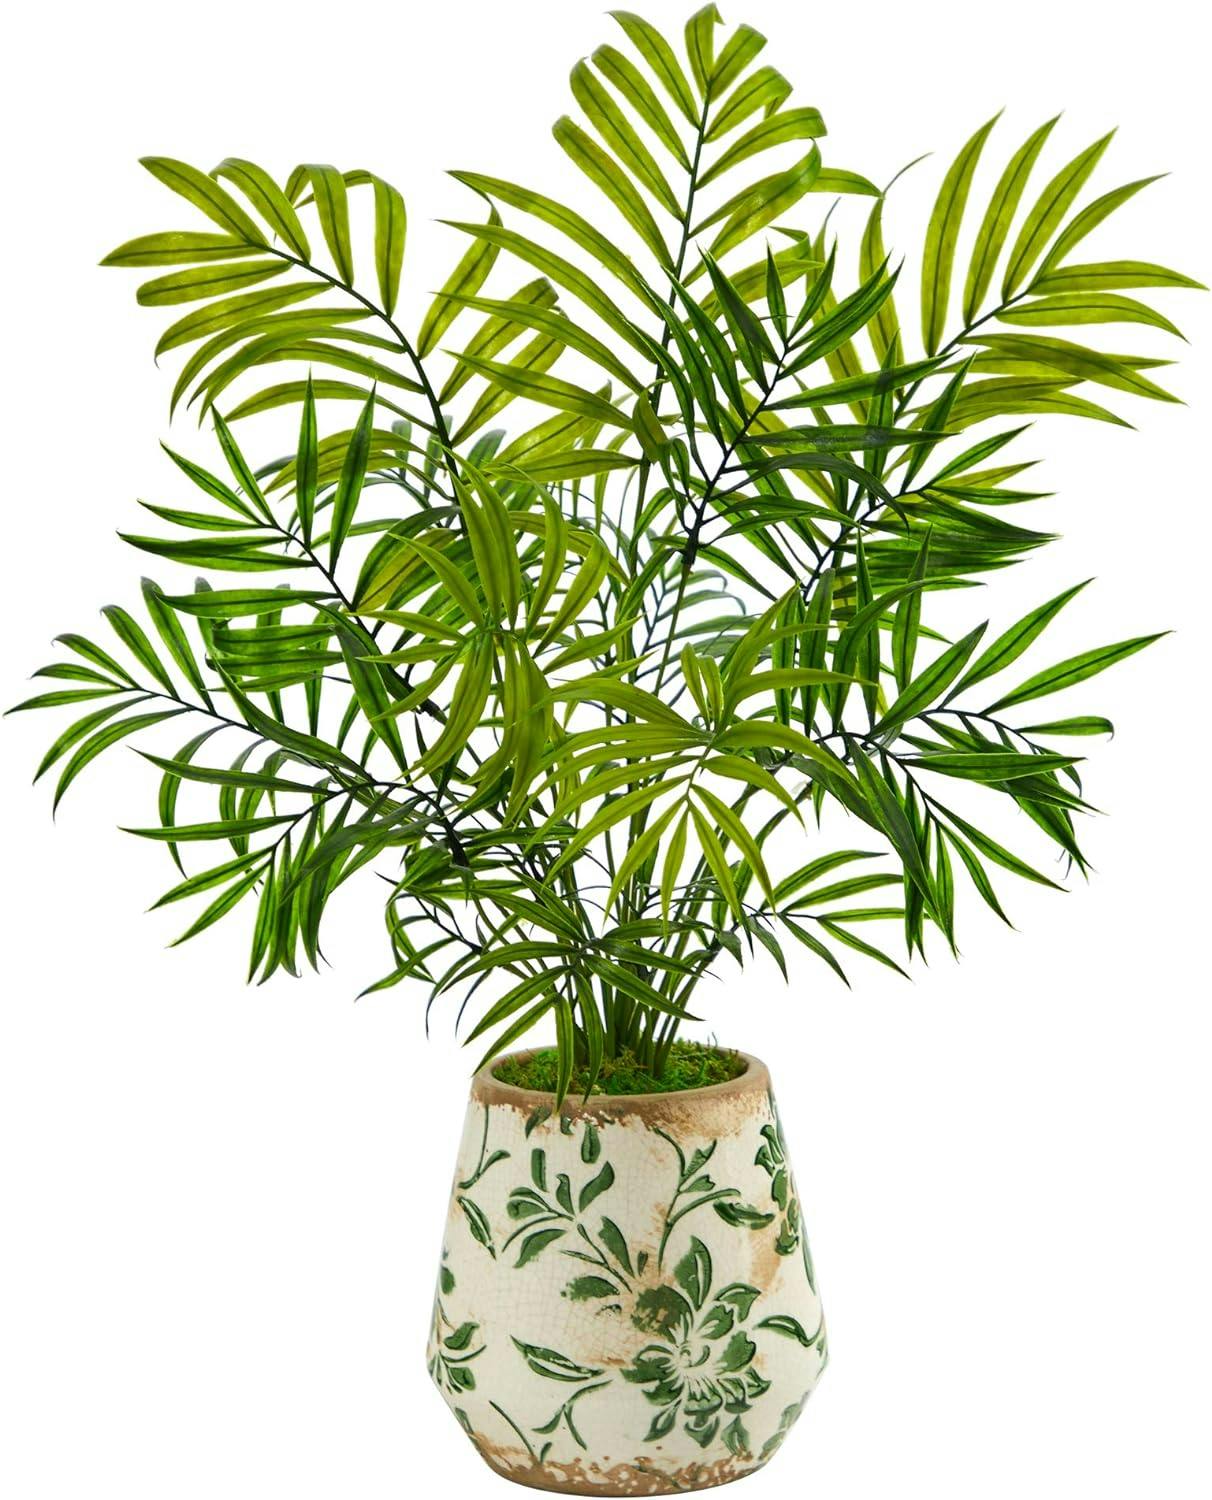 18" Mini Areca Palm Silk Plant in Floral Vase with Natural Moss